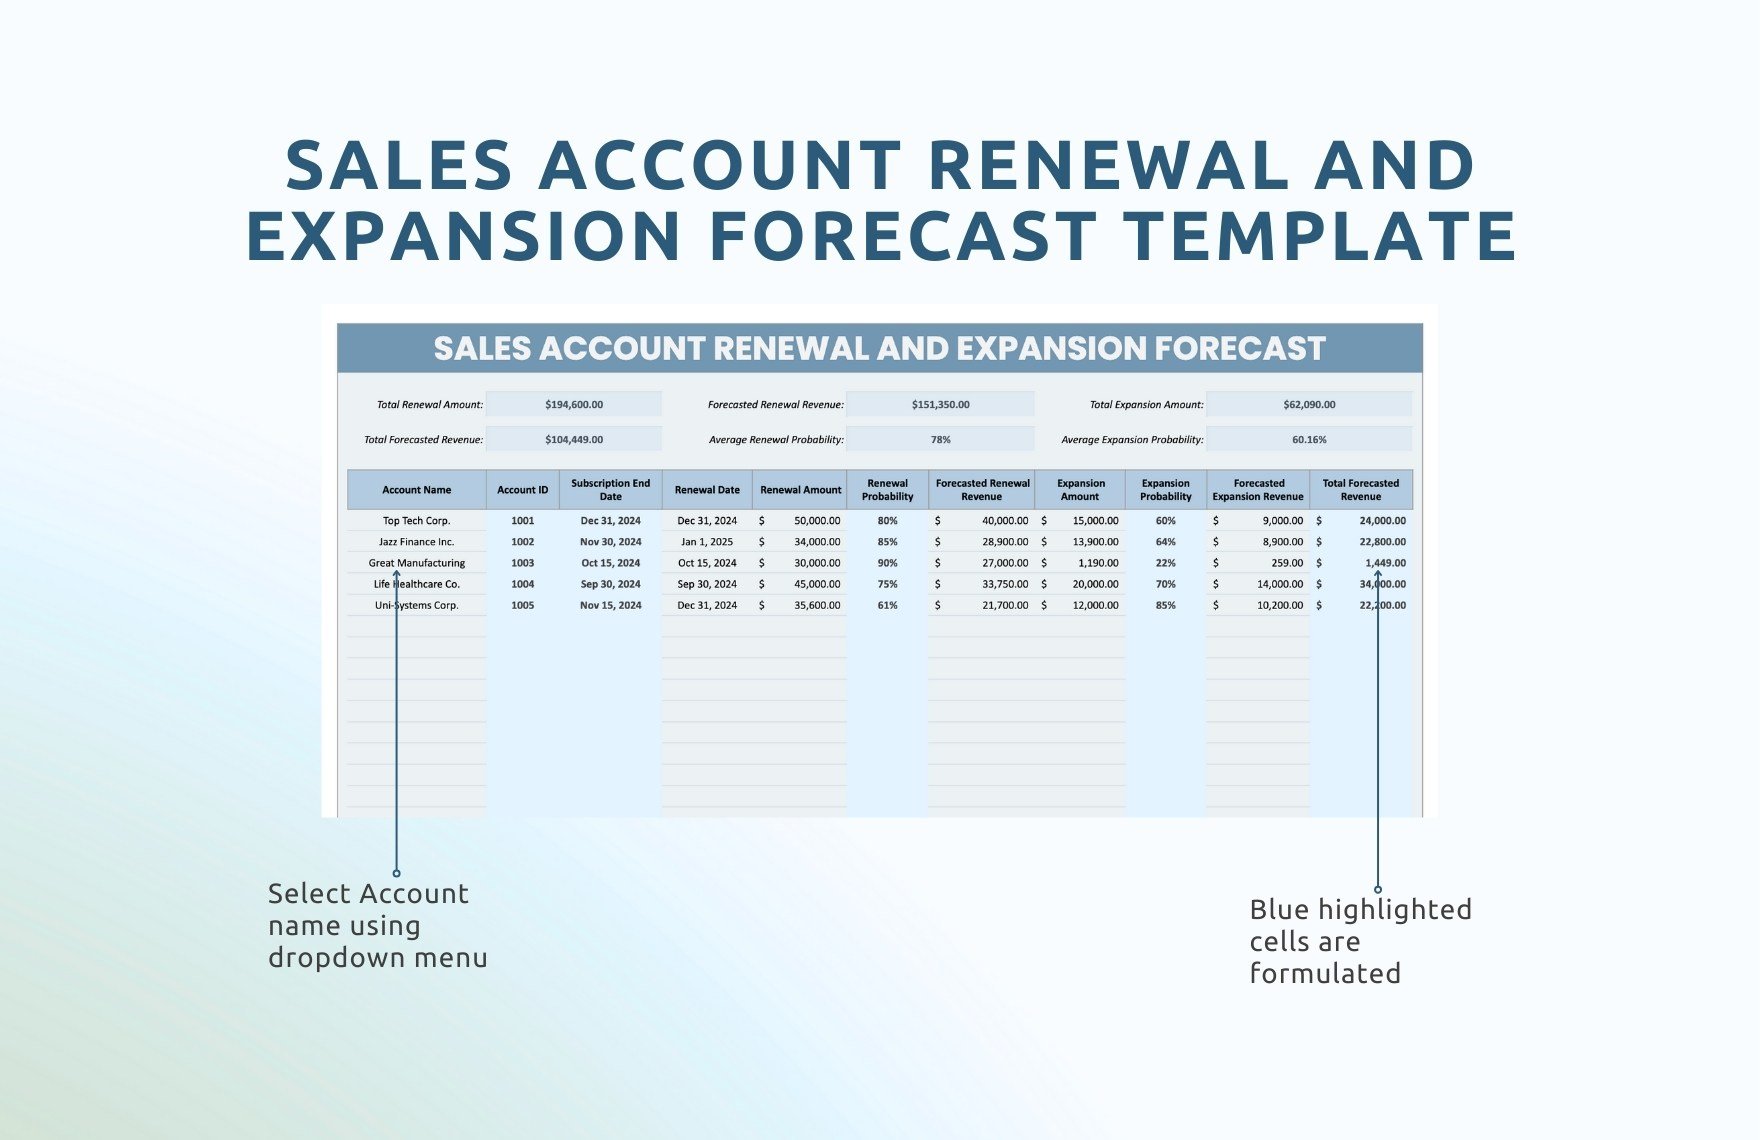 Sales Account Renewal and Expansion Forecast Template